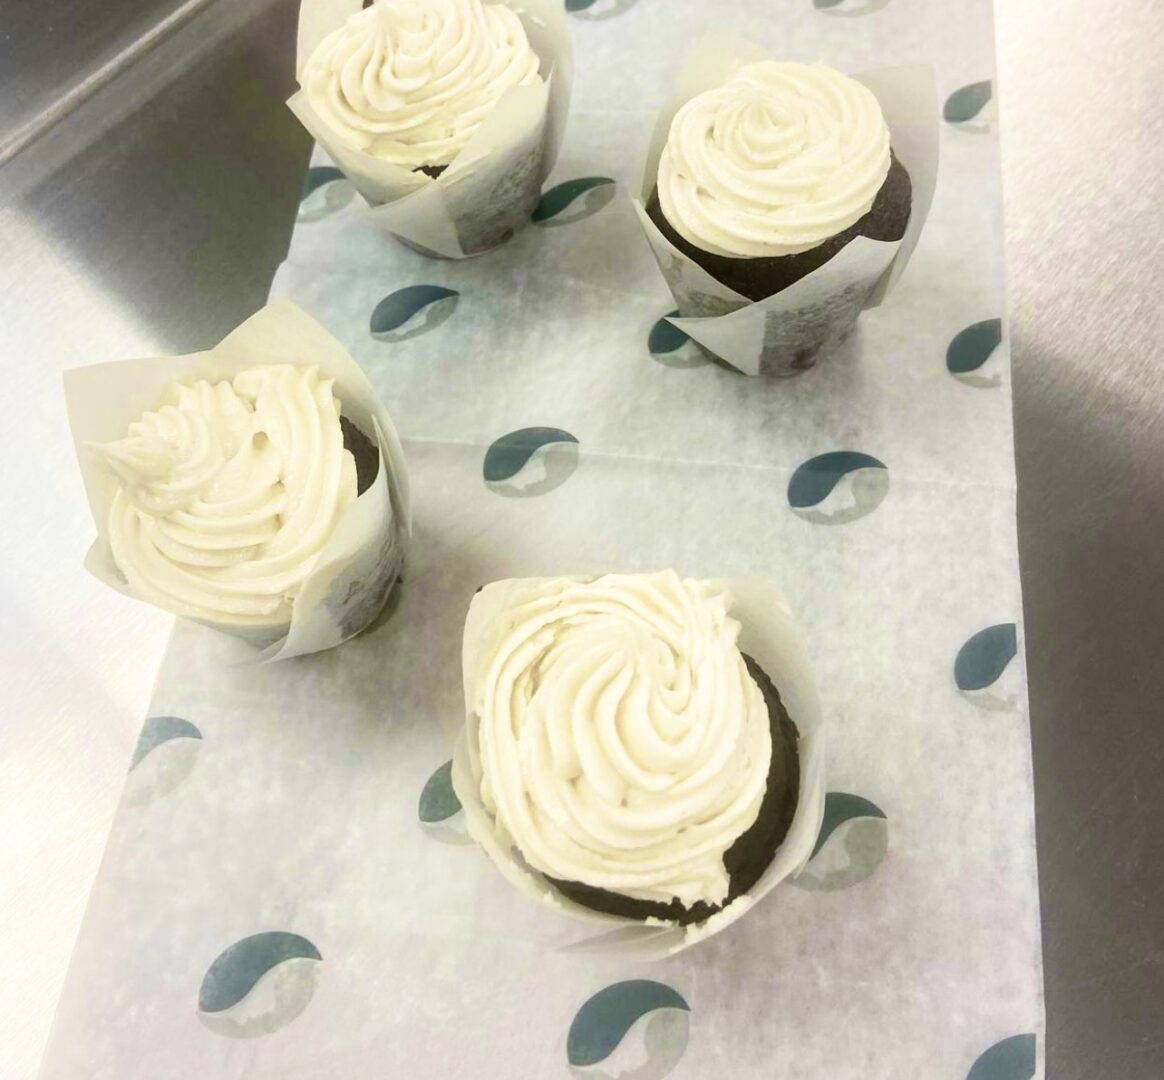 A Cupcake Tissue Around a Cupcake With Rose Frosting